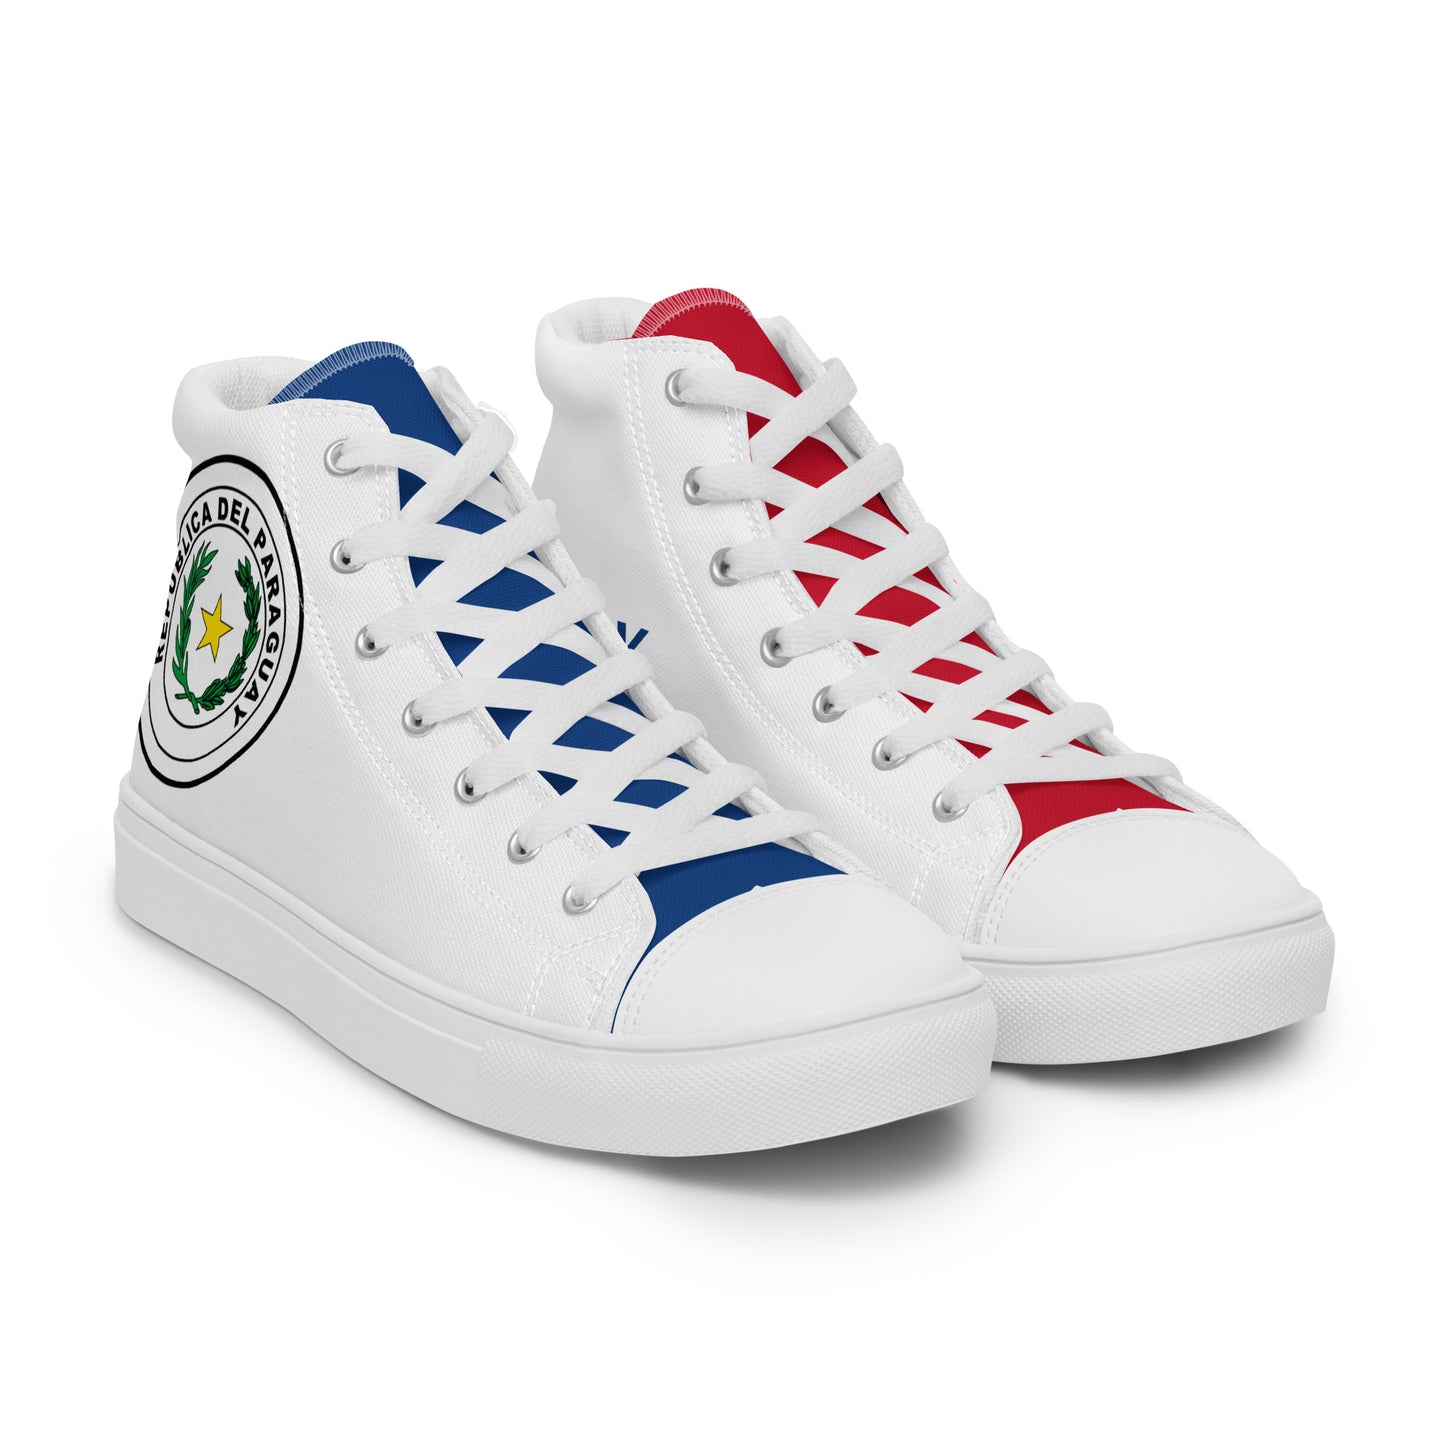 Paraguay - Mujer - Blanco - Zapatos High top